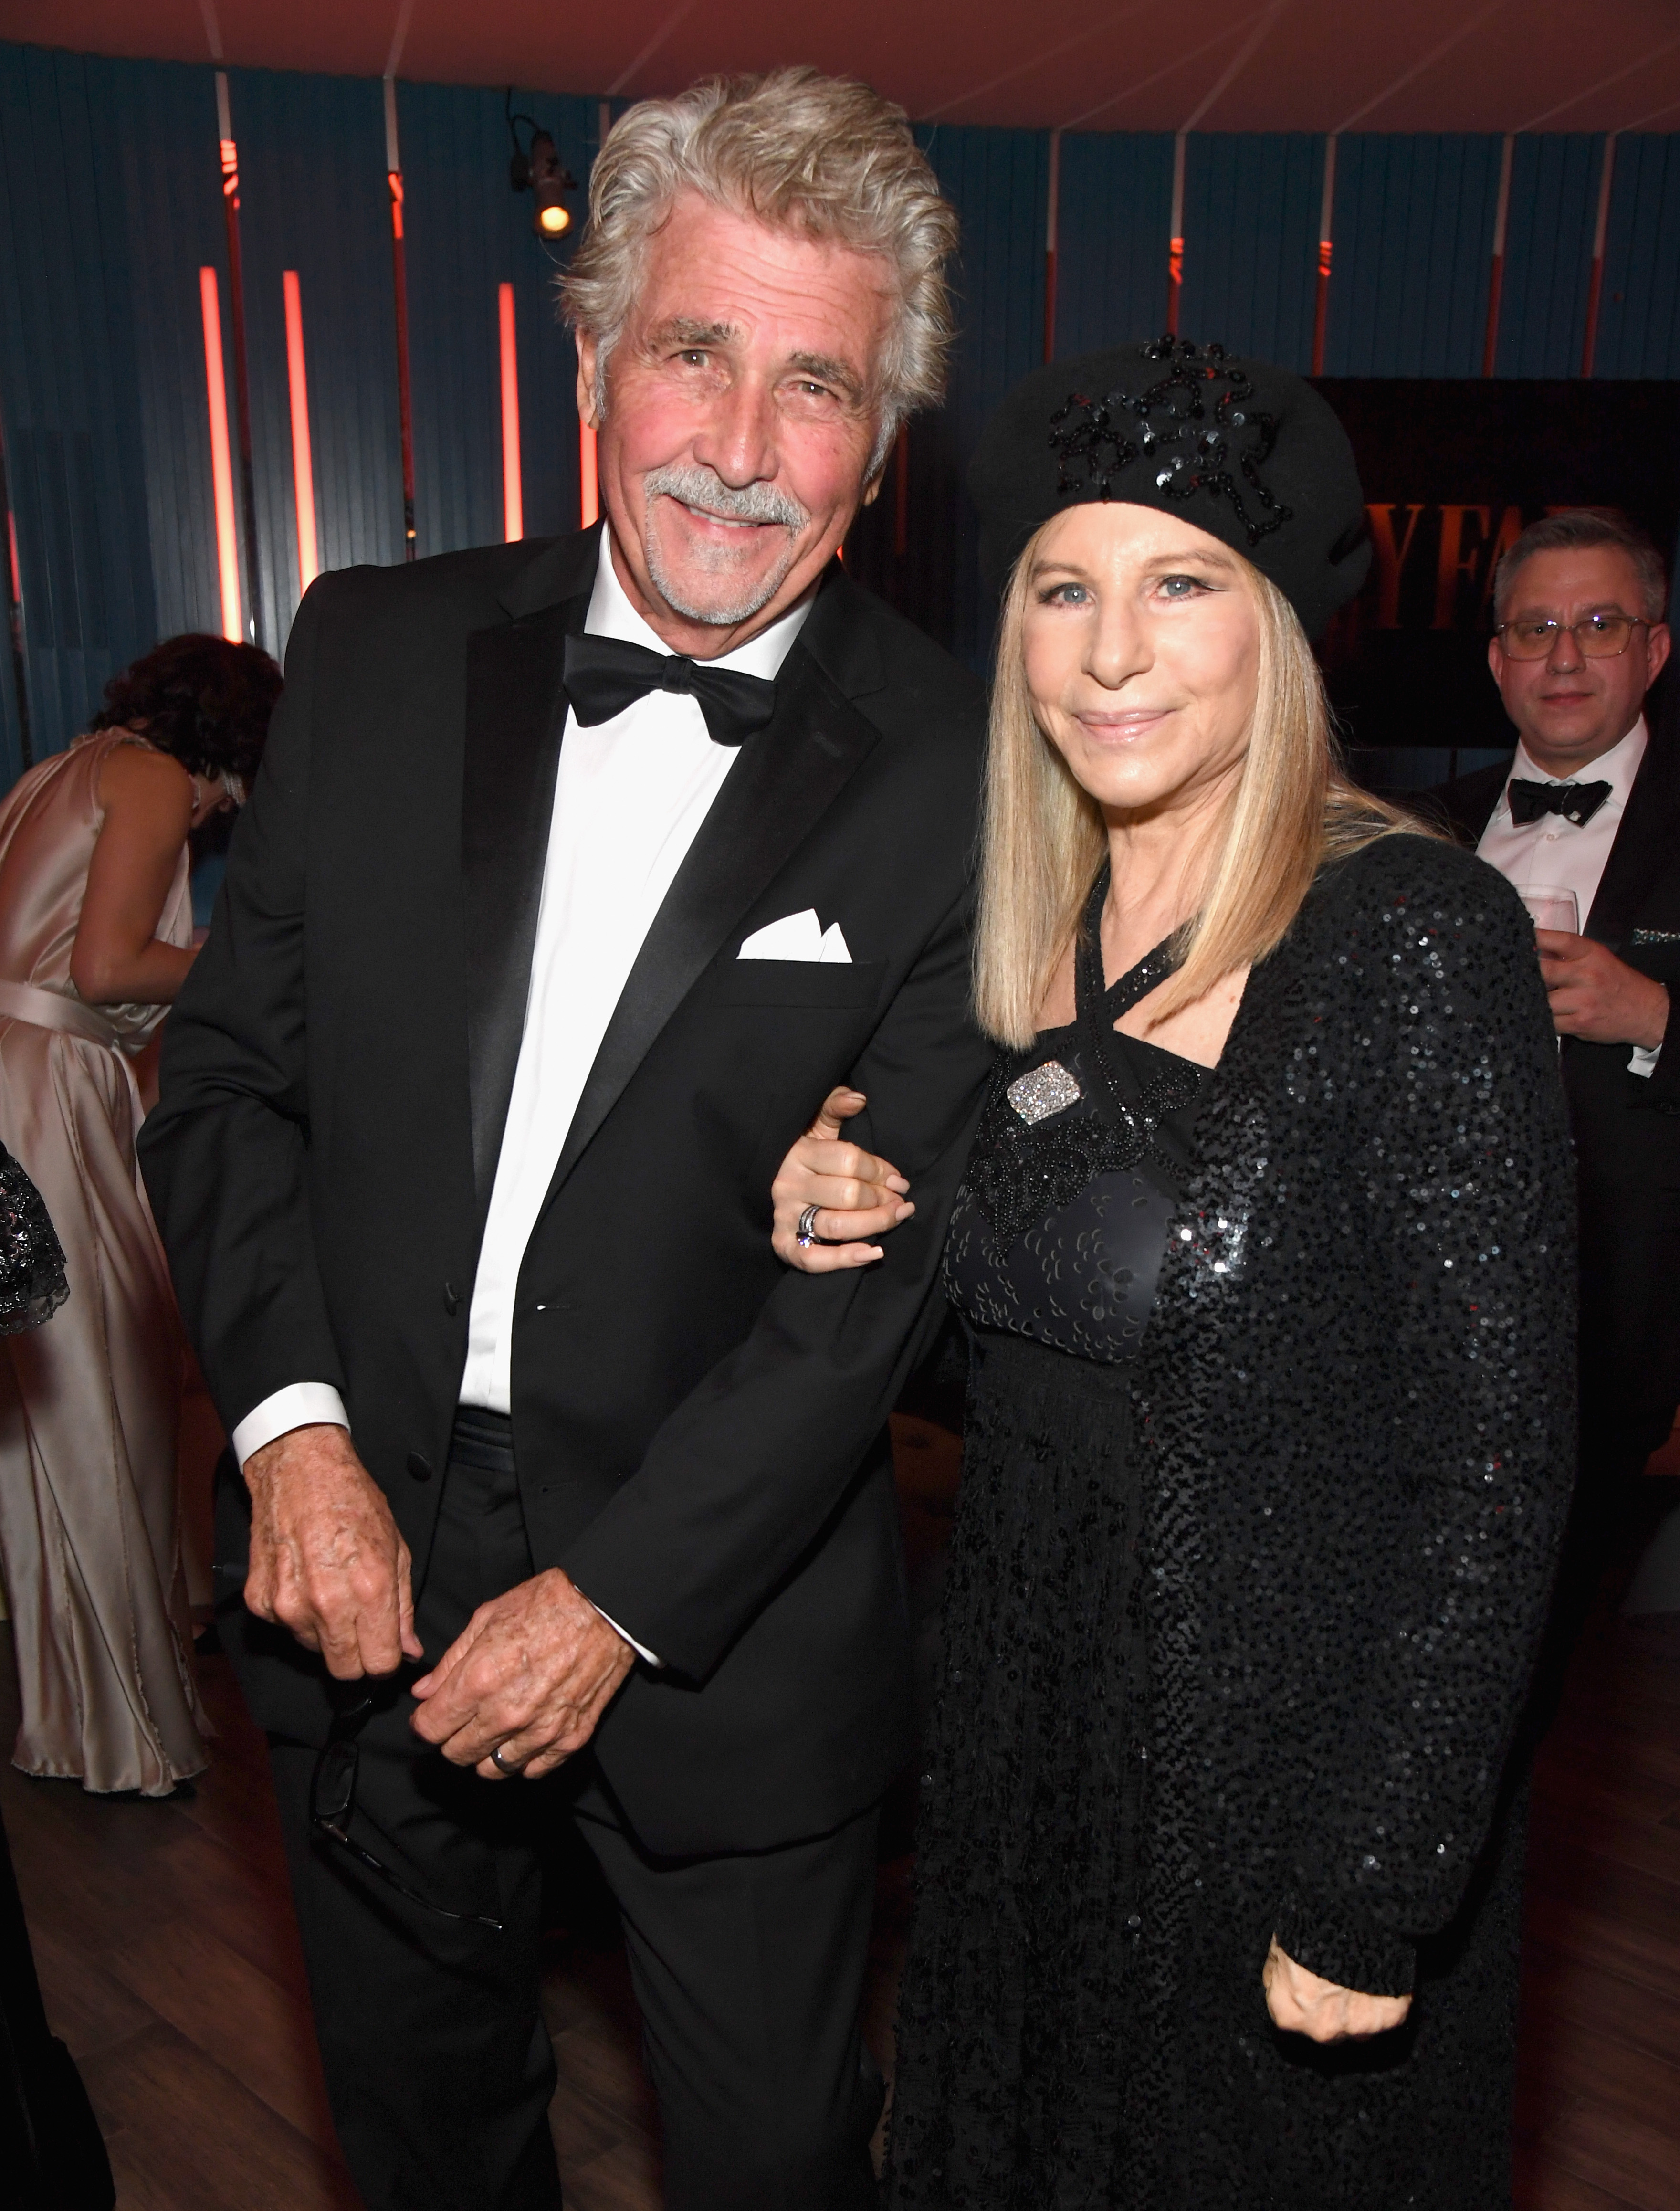 James Brolin and Barbra Streisand at the Vanity Fair Oscar Party in Beverly Hills, California on February 24, 2019 | Source: Getty Images